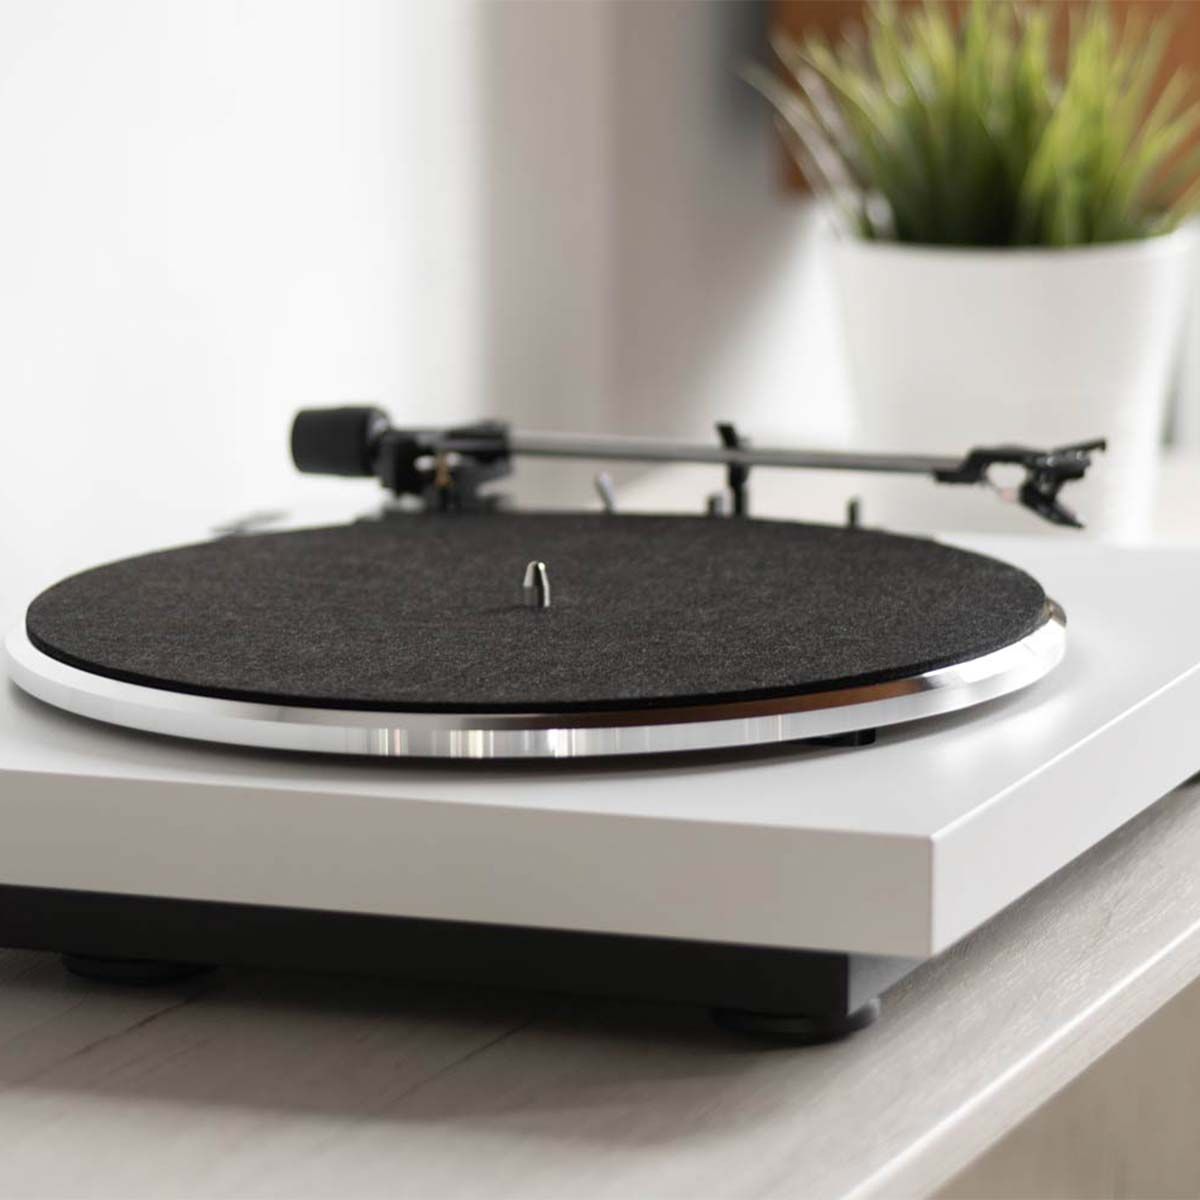 Andover SpinDeck Max Turntable, White, detailed side view